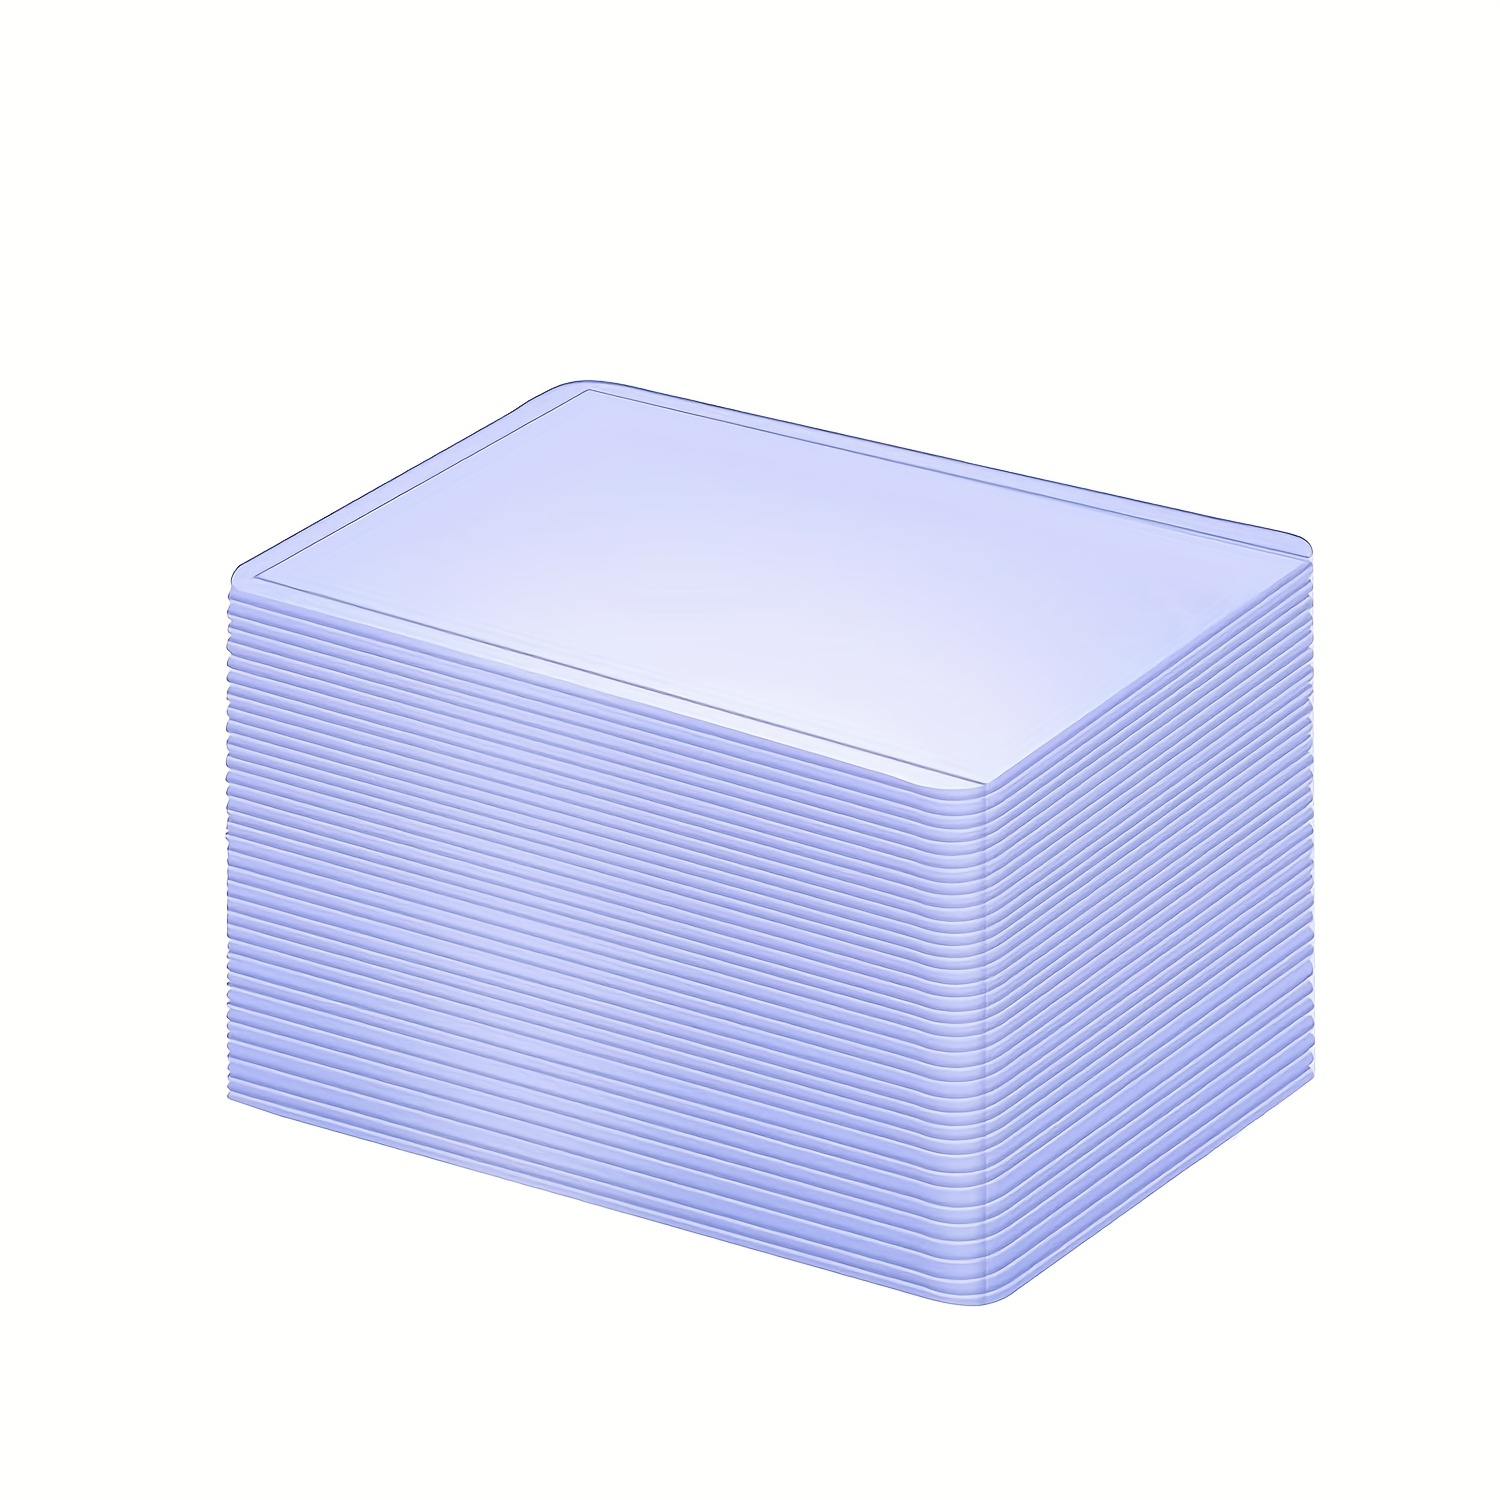  100 Pack Top Loaders for Cards Sleeves Hard Plastics